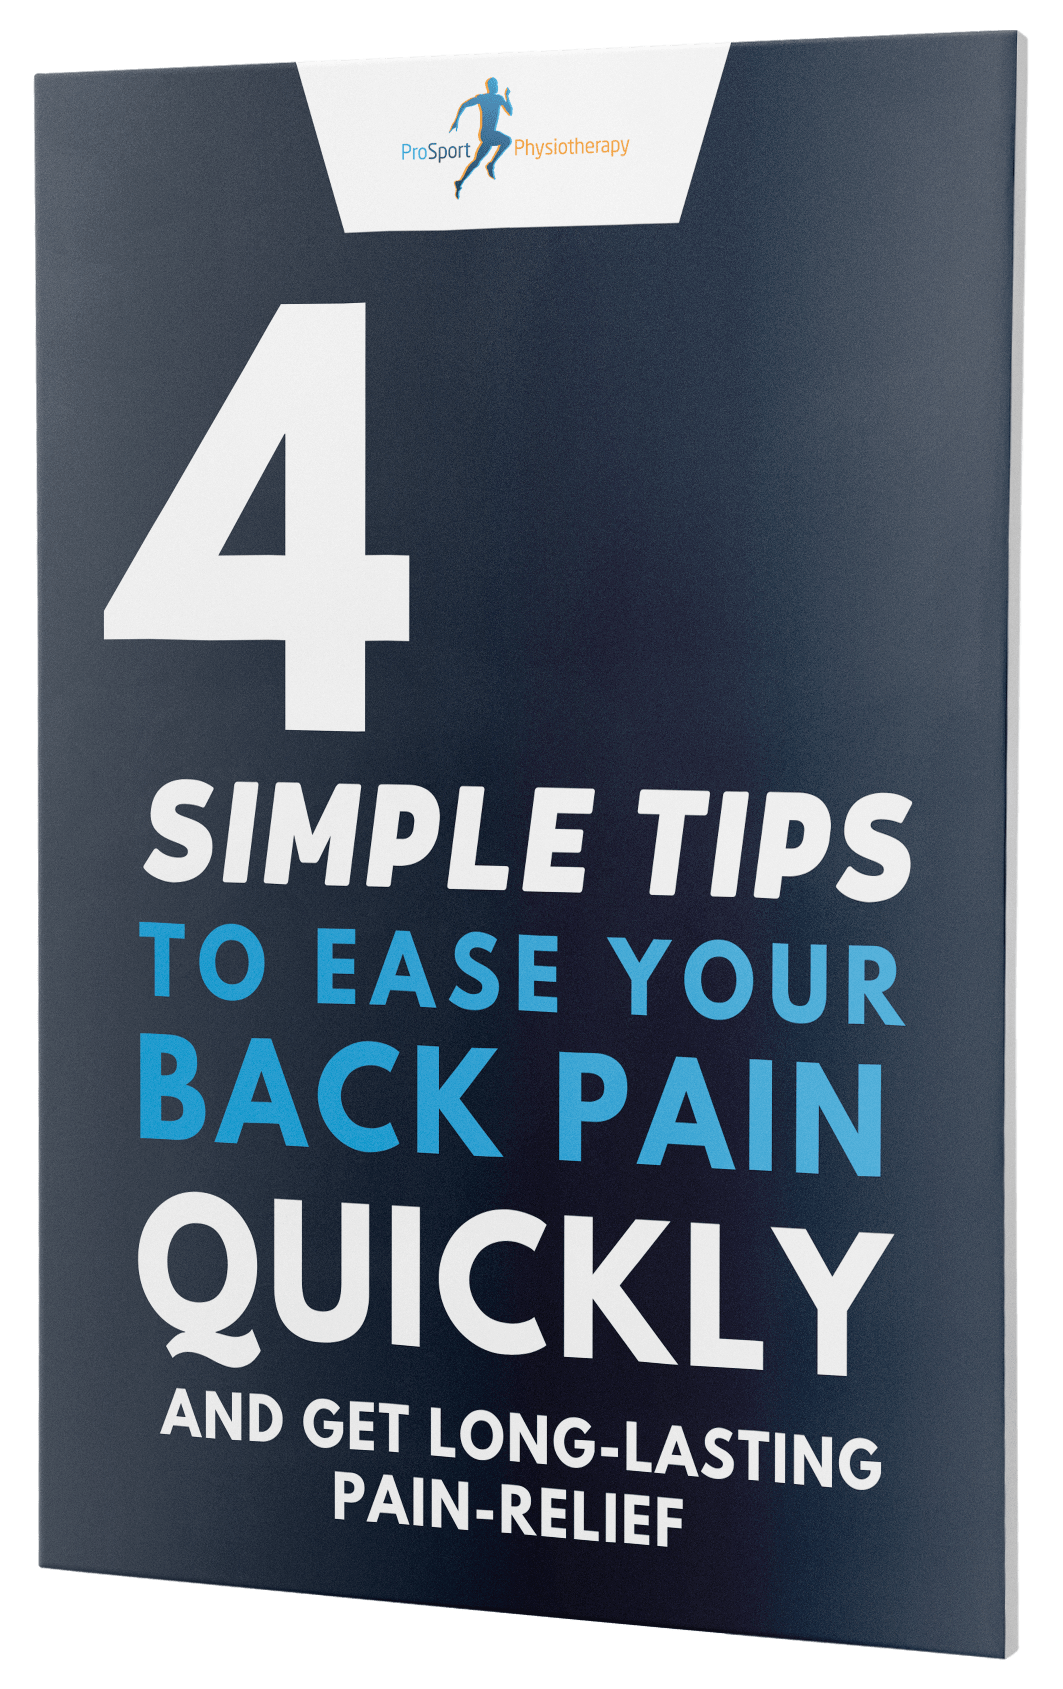 Back Pain Huddersfield Relief Tips PDF Guide - Pro Sport Physiotherapy Huddersfield Clinic